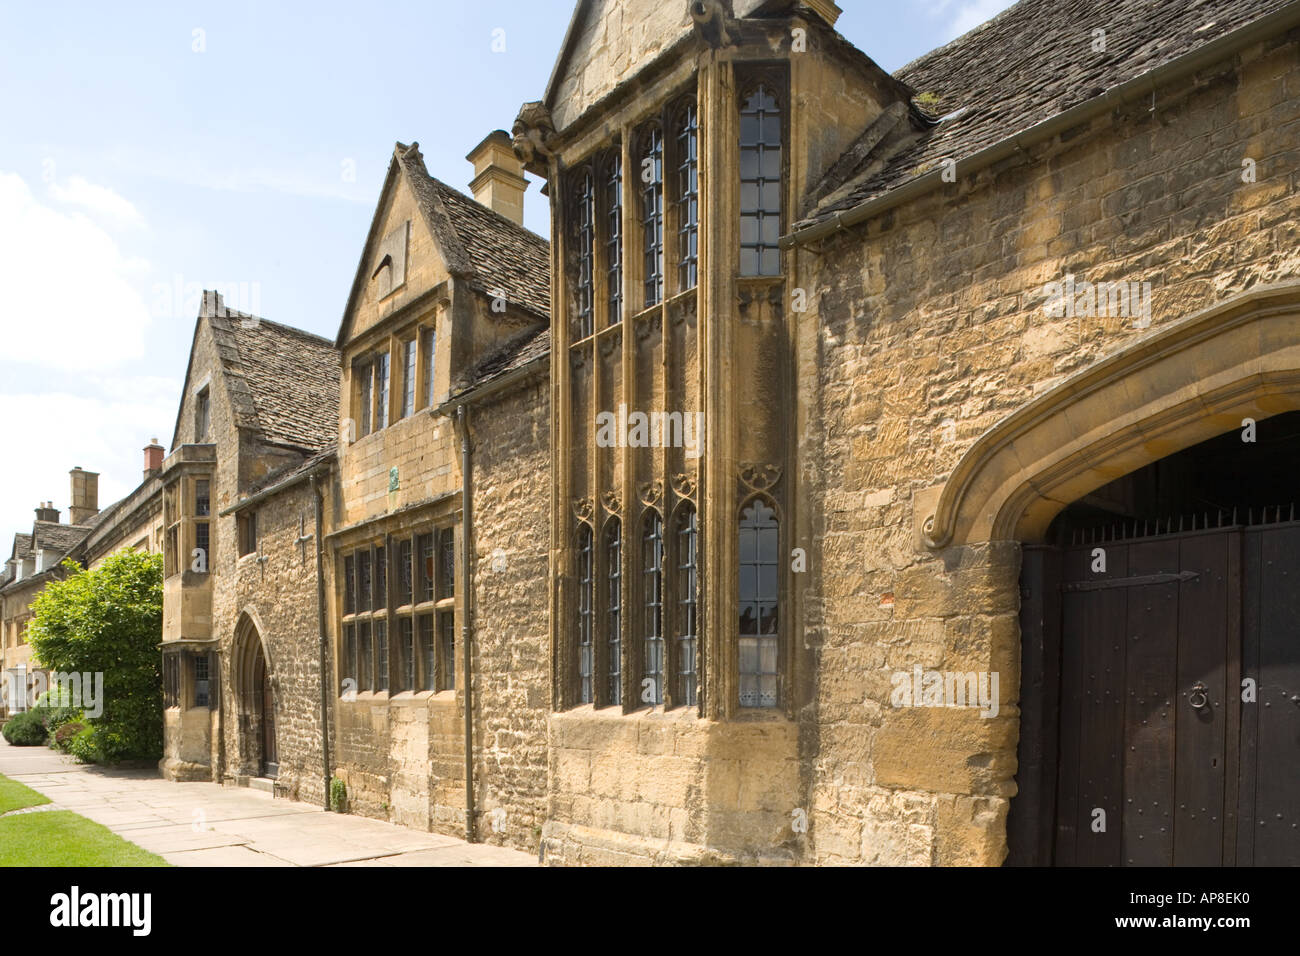 William Grevel's House (c.1320 AD) in the High Street of the Cotswold town of Chipping Campden, Gloucestershire Stock Photo